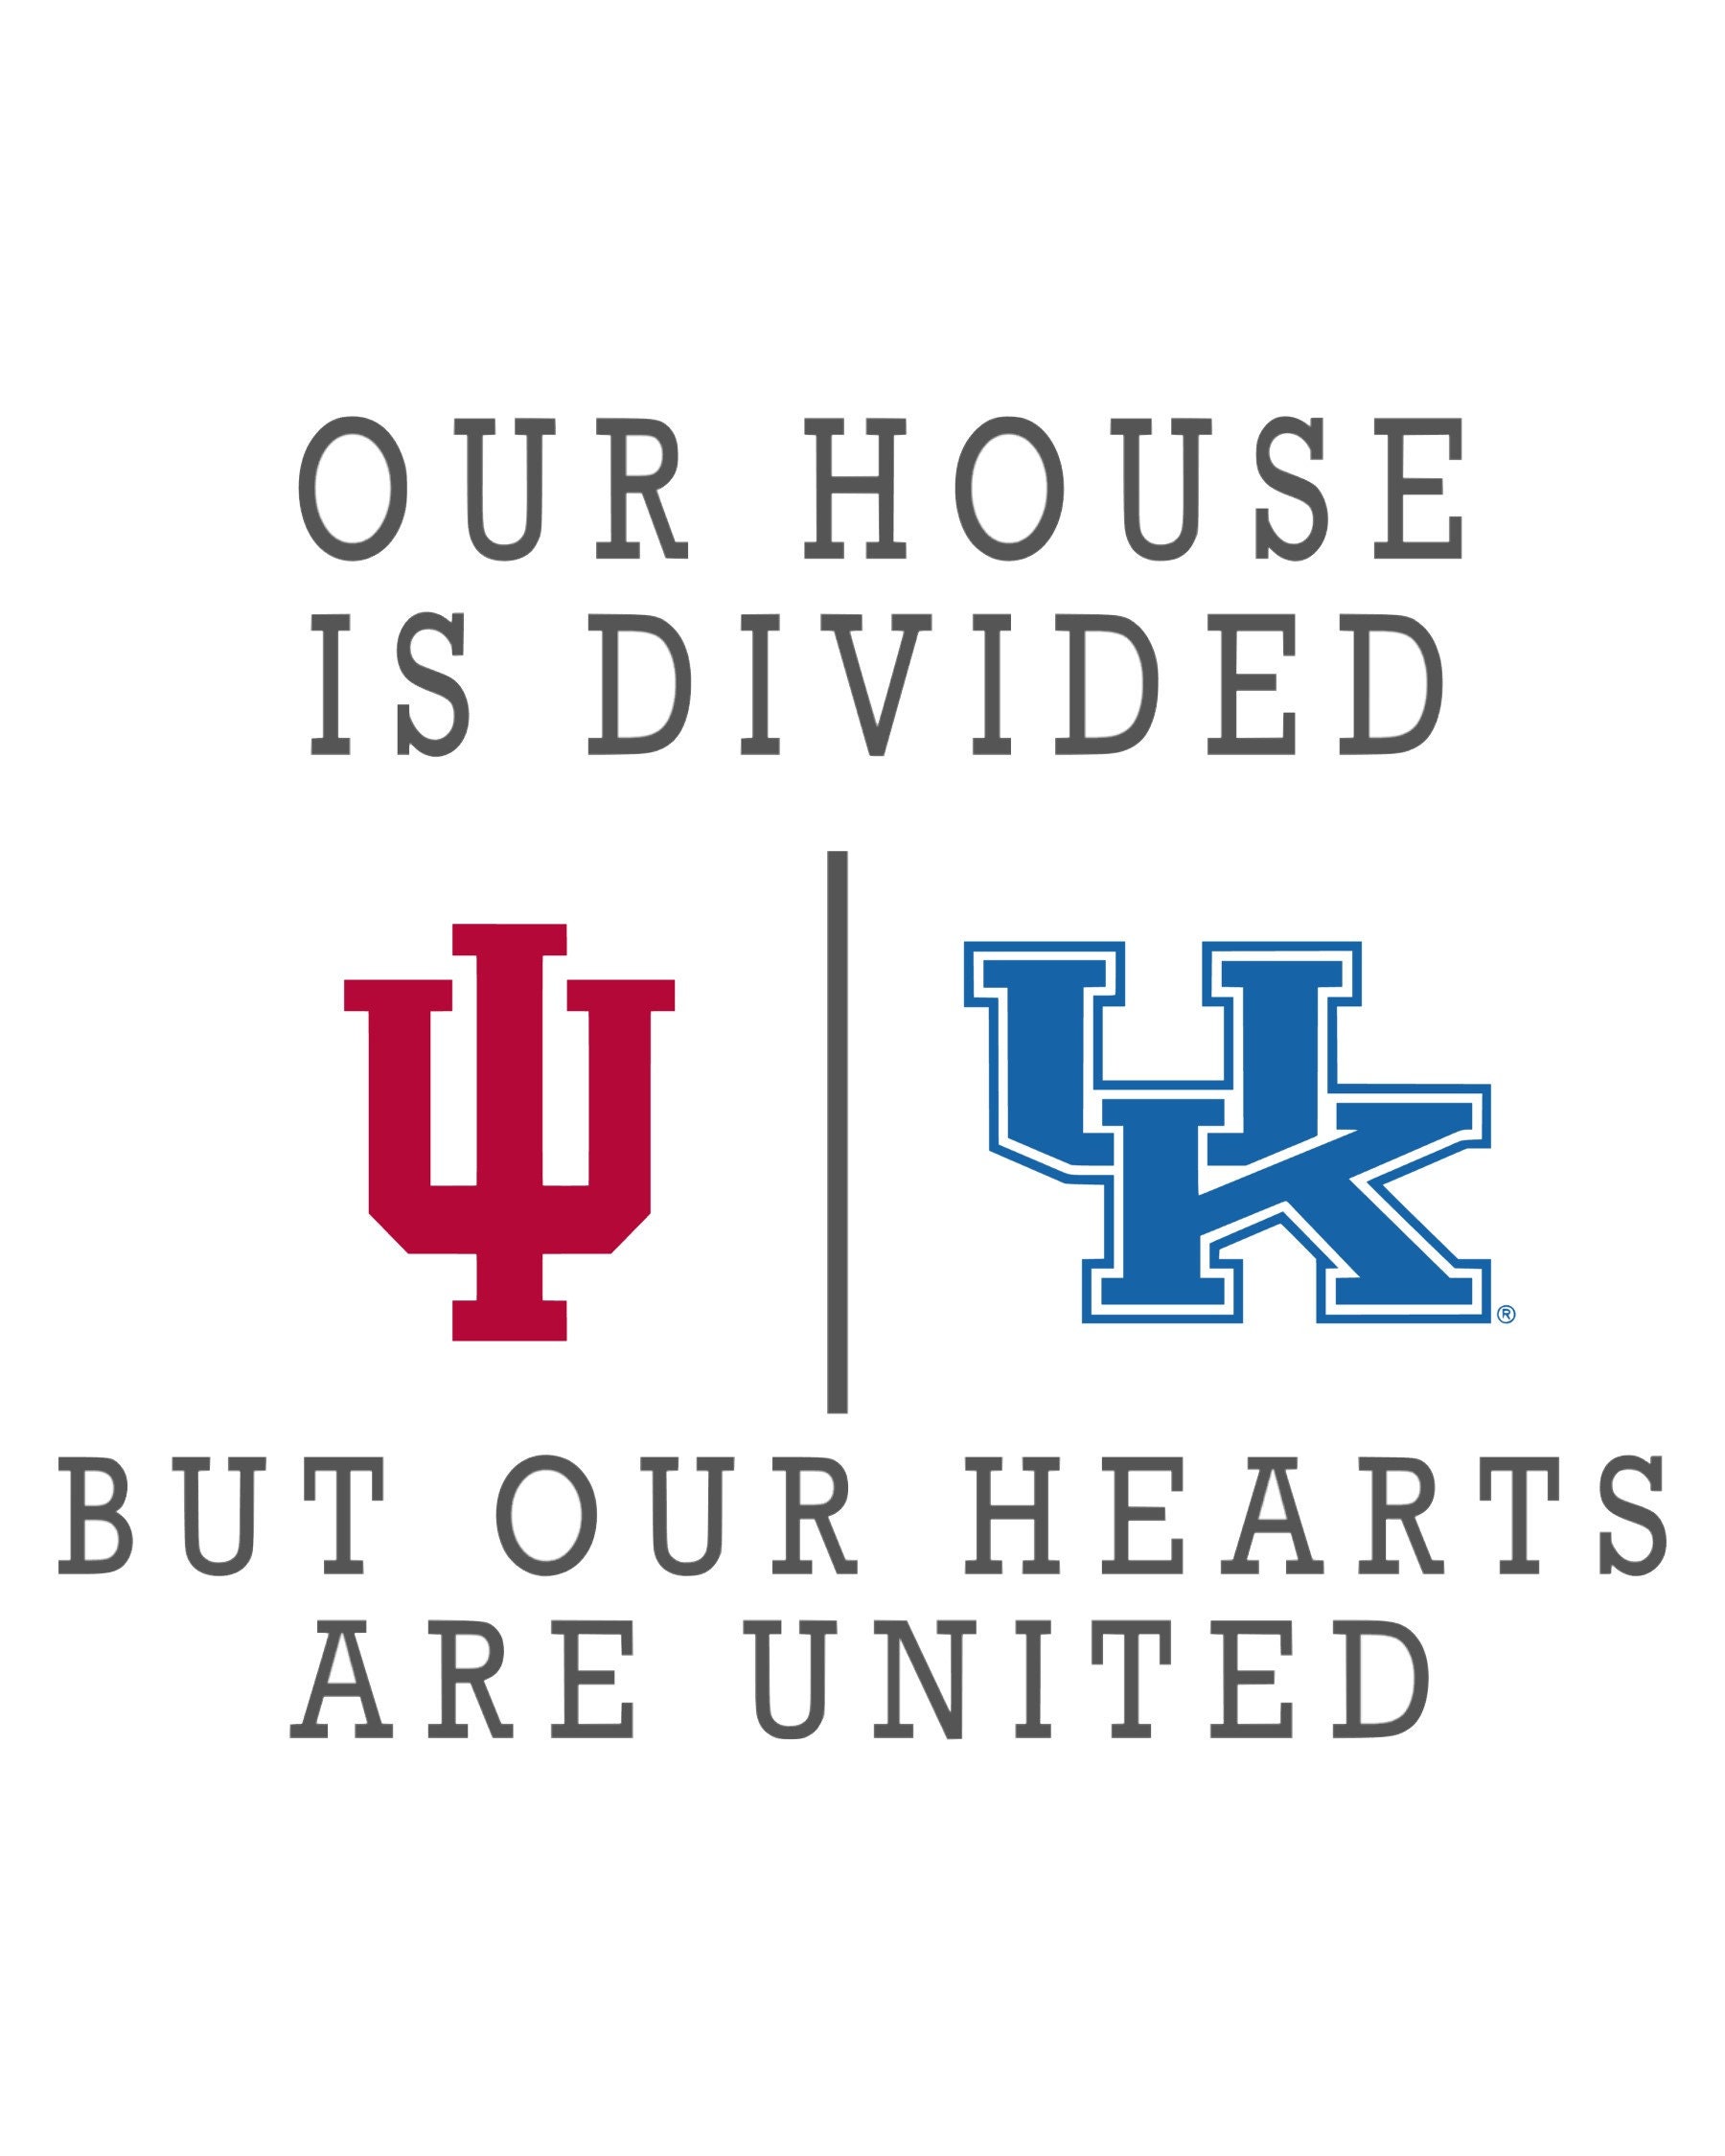 A house divided: UofL and UK fans tailgating together